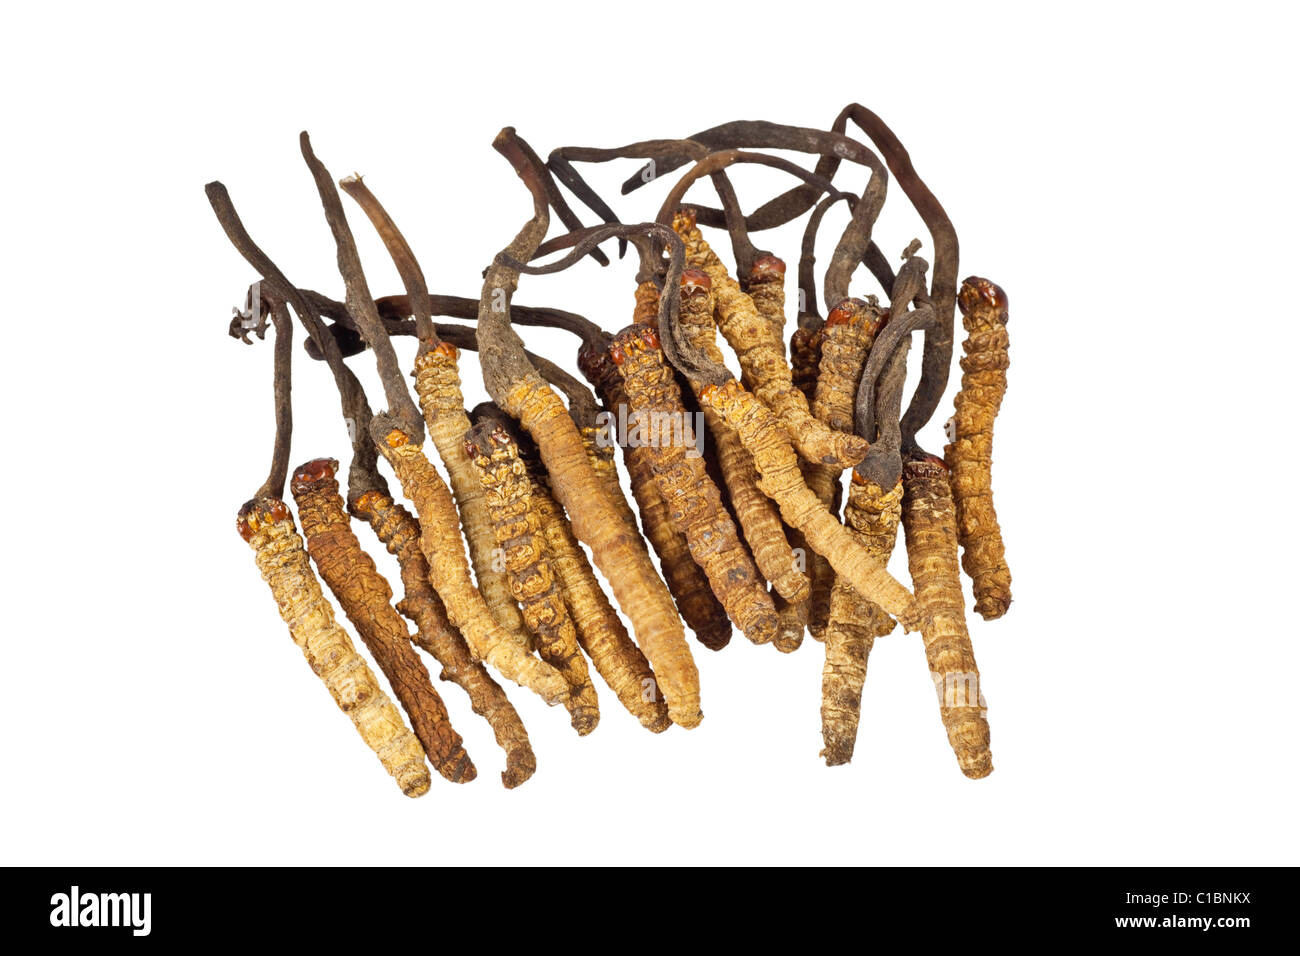 Ingredient used in Traditional Chinese Medicine isolated on white background - Cordyceps sinensis (caterpillar fungus) Stock Photo